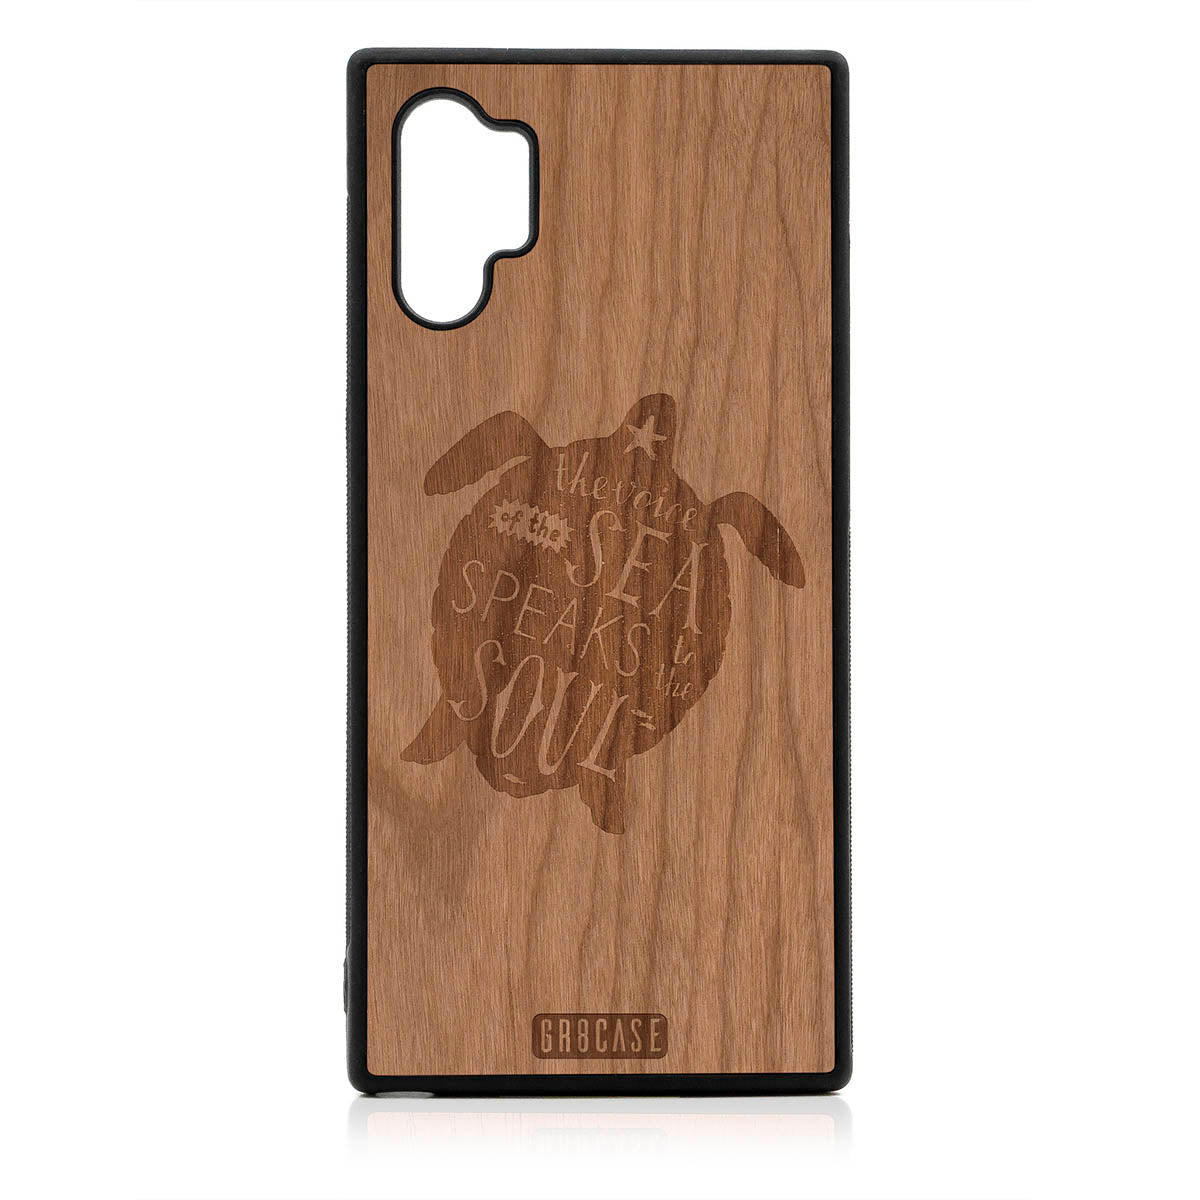 The Voice Of The Sea Speaks To The Soul (Turtle) Design Wood Case For Samsung Galaxy Note 10 Plus